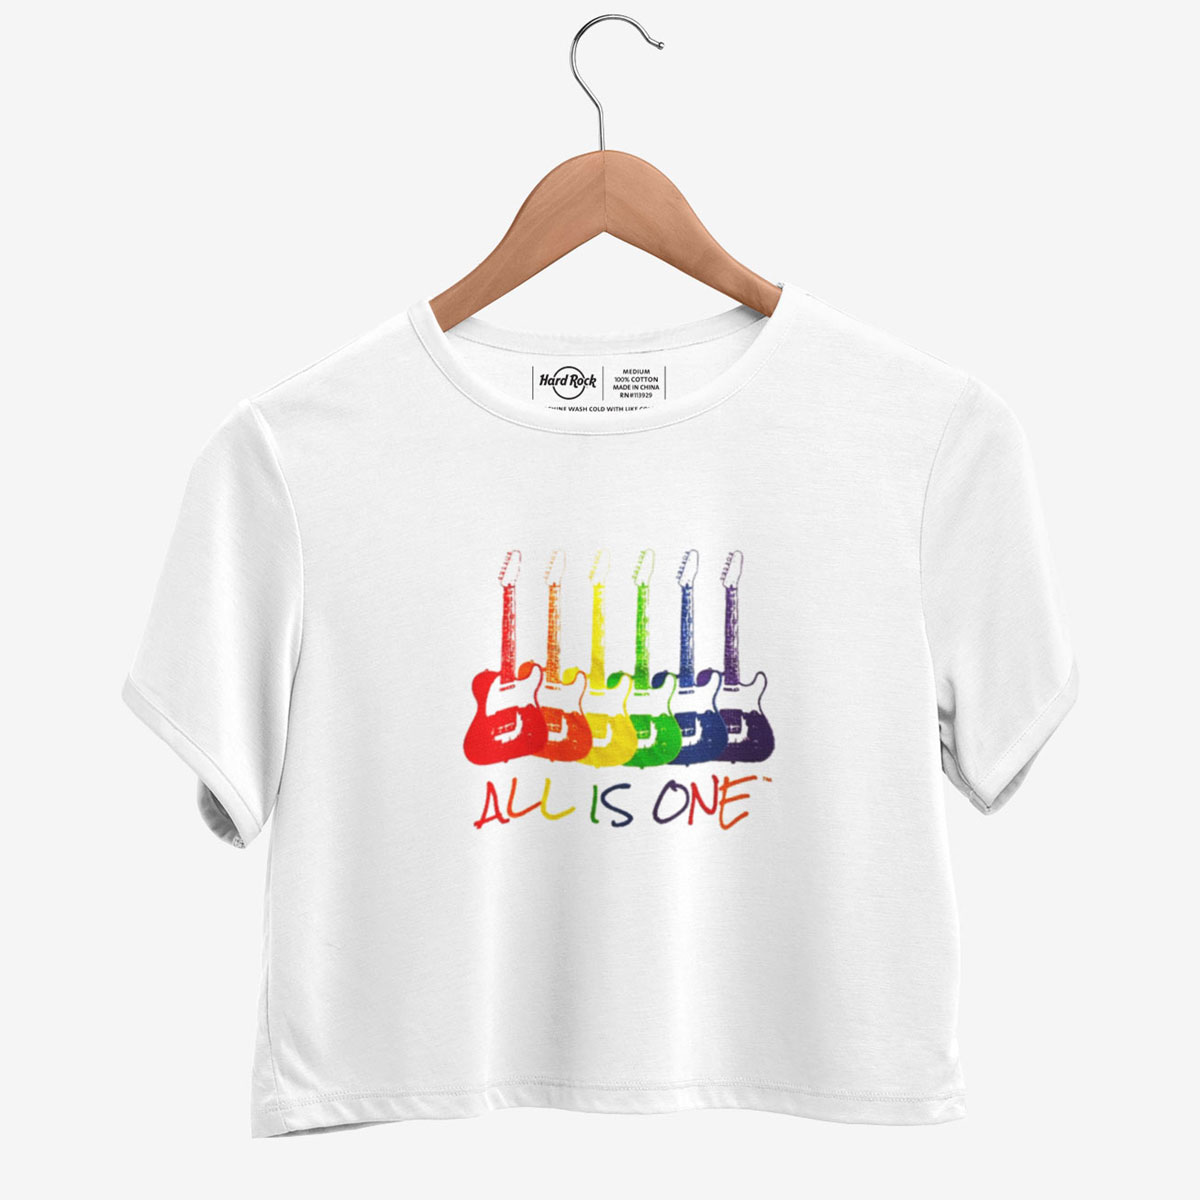 Retro Cropped Top Tee with Rainbow Guitars All Is One Design image number 8